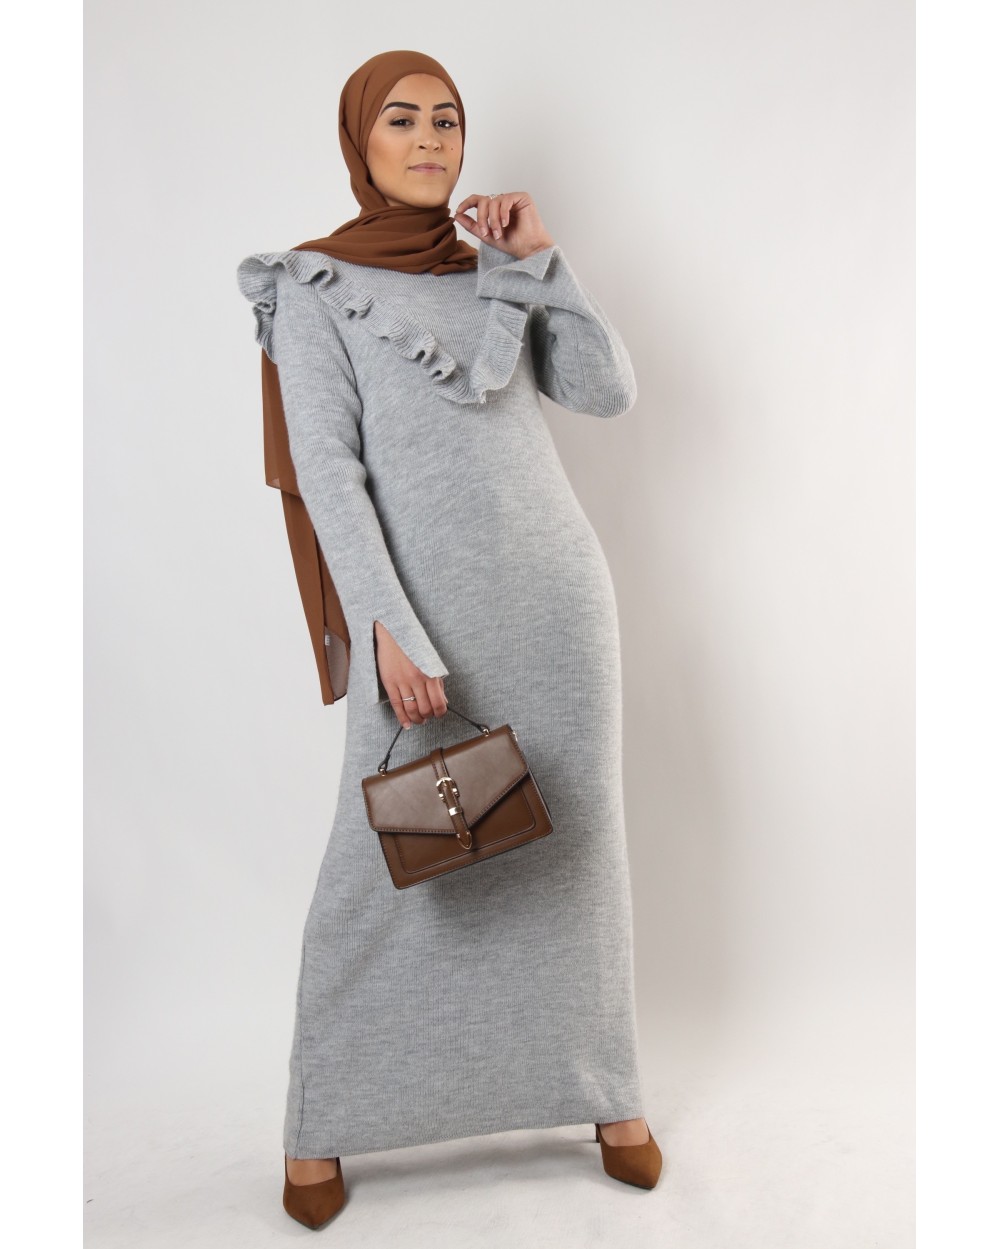 Sweater dress with small ruffles in V-neck on the bust